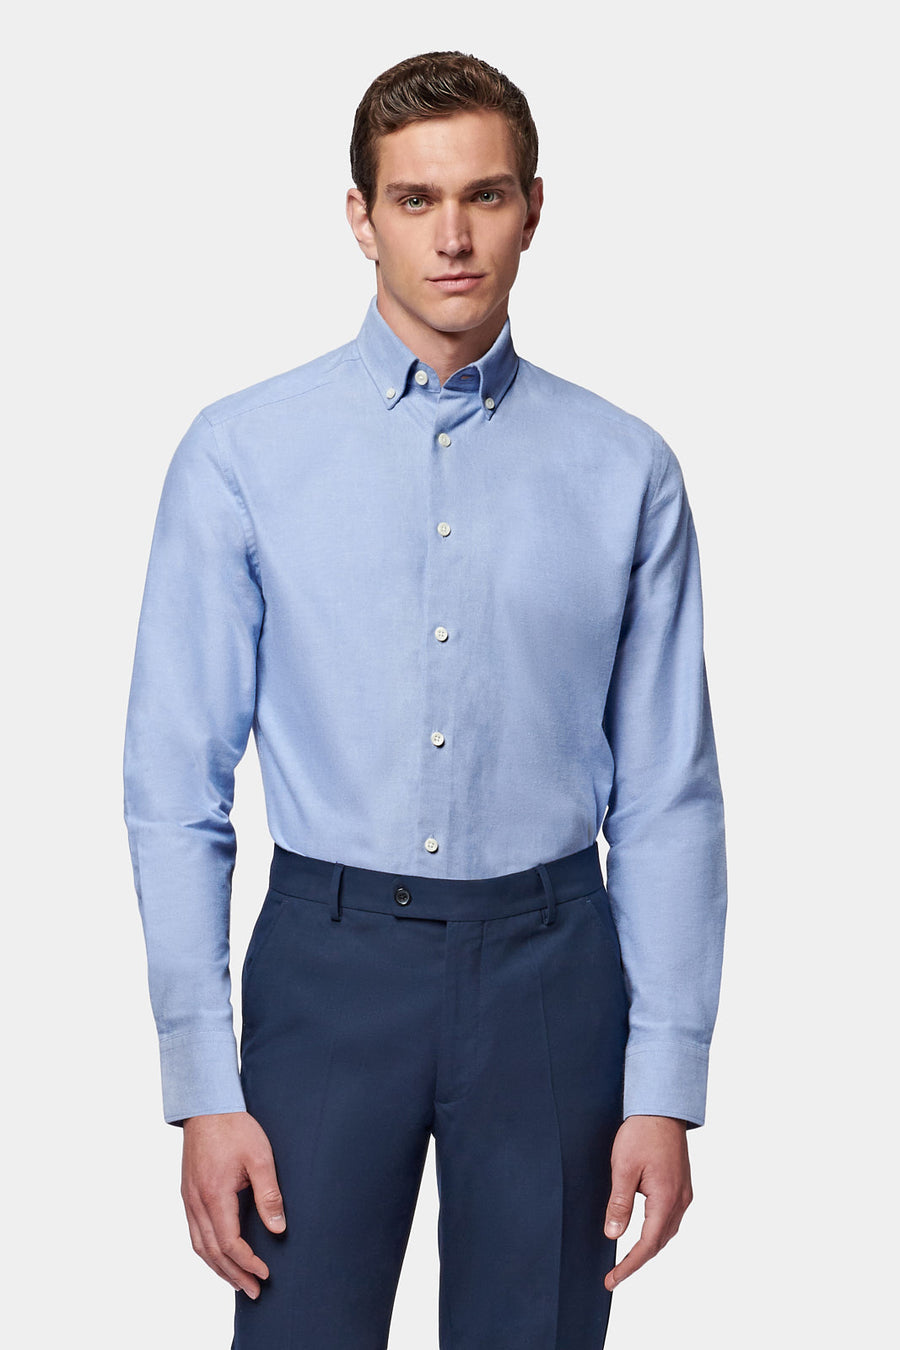 Casual Oxford Long Sleeve Shirt in Blue Yonder